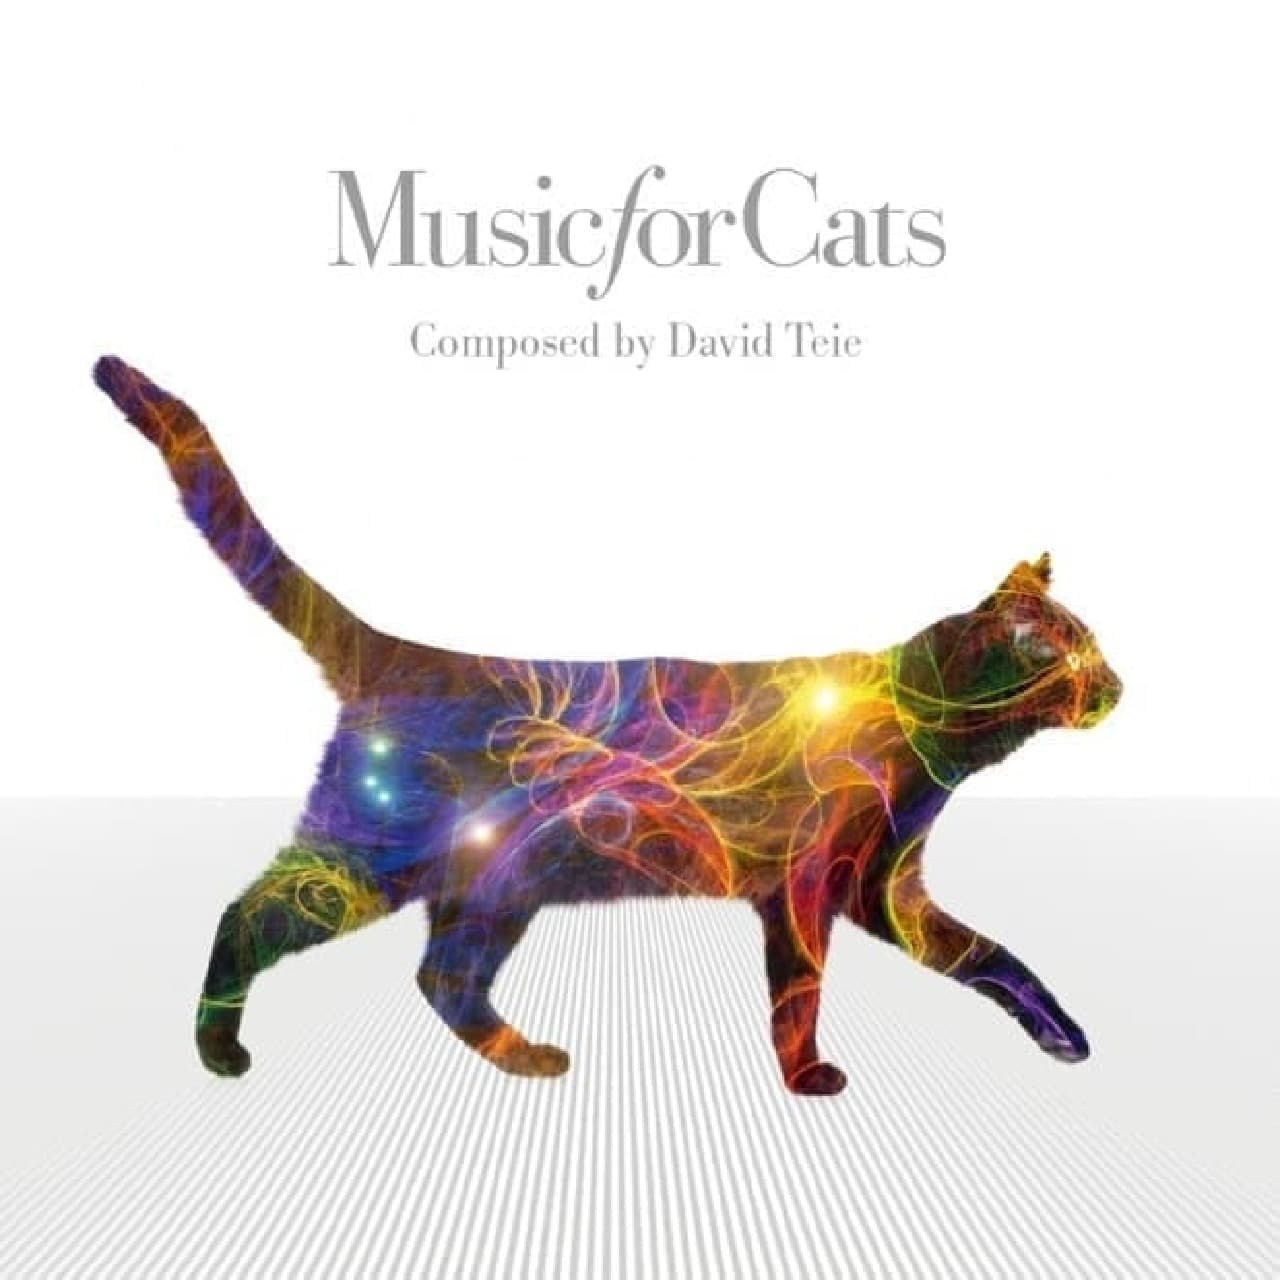 Music CD "Music For Cats" that cats are fascinated by